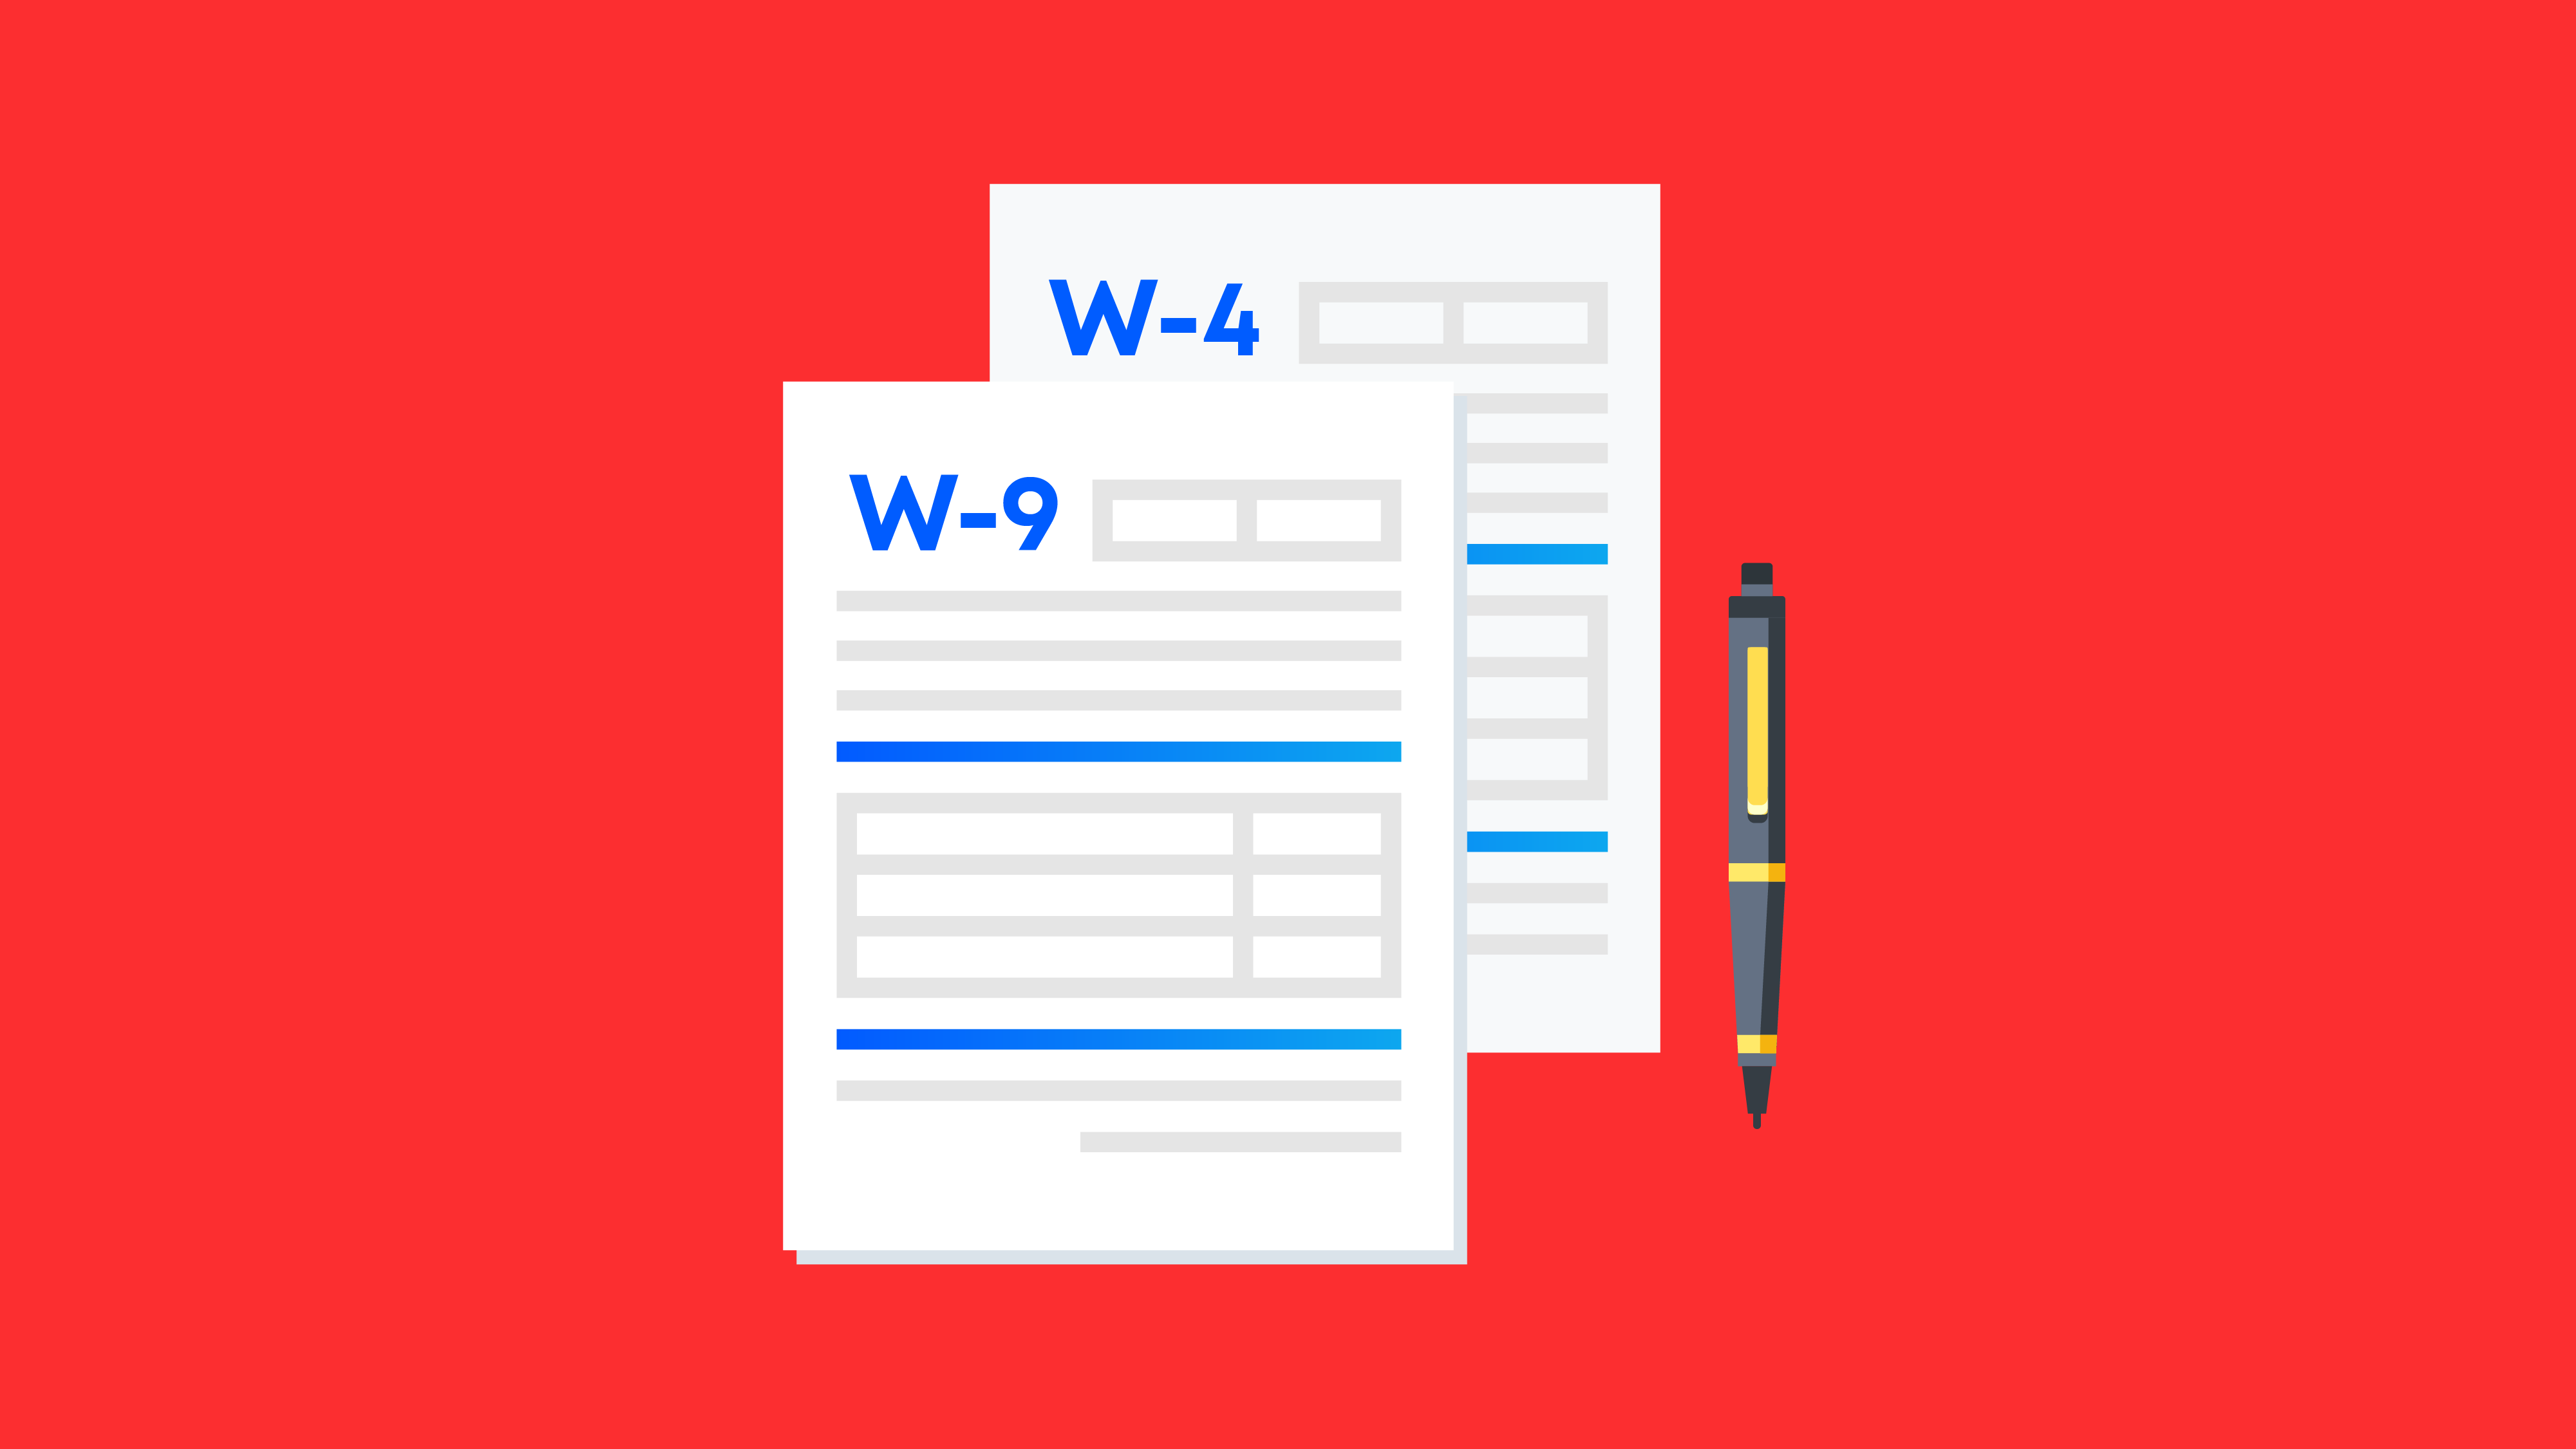 Illustration of W-4 and W-9 forms. 